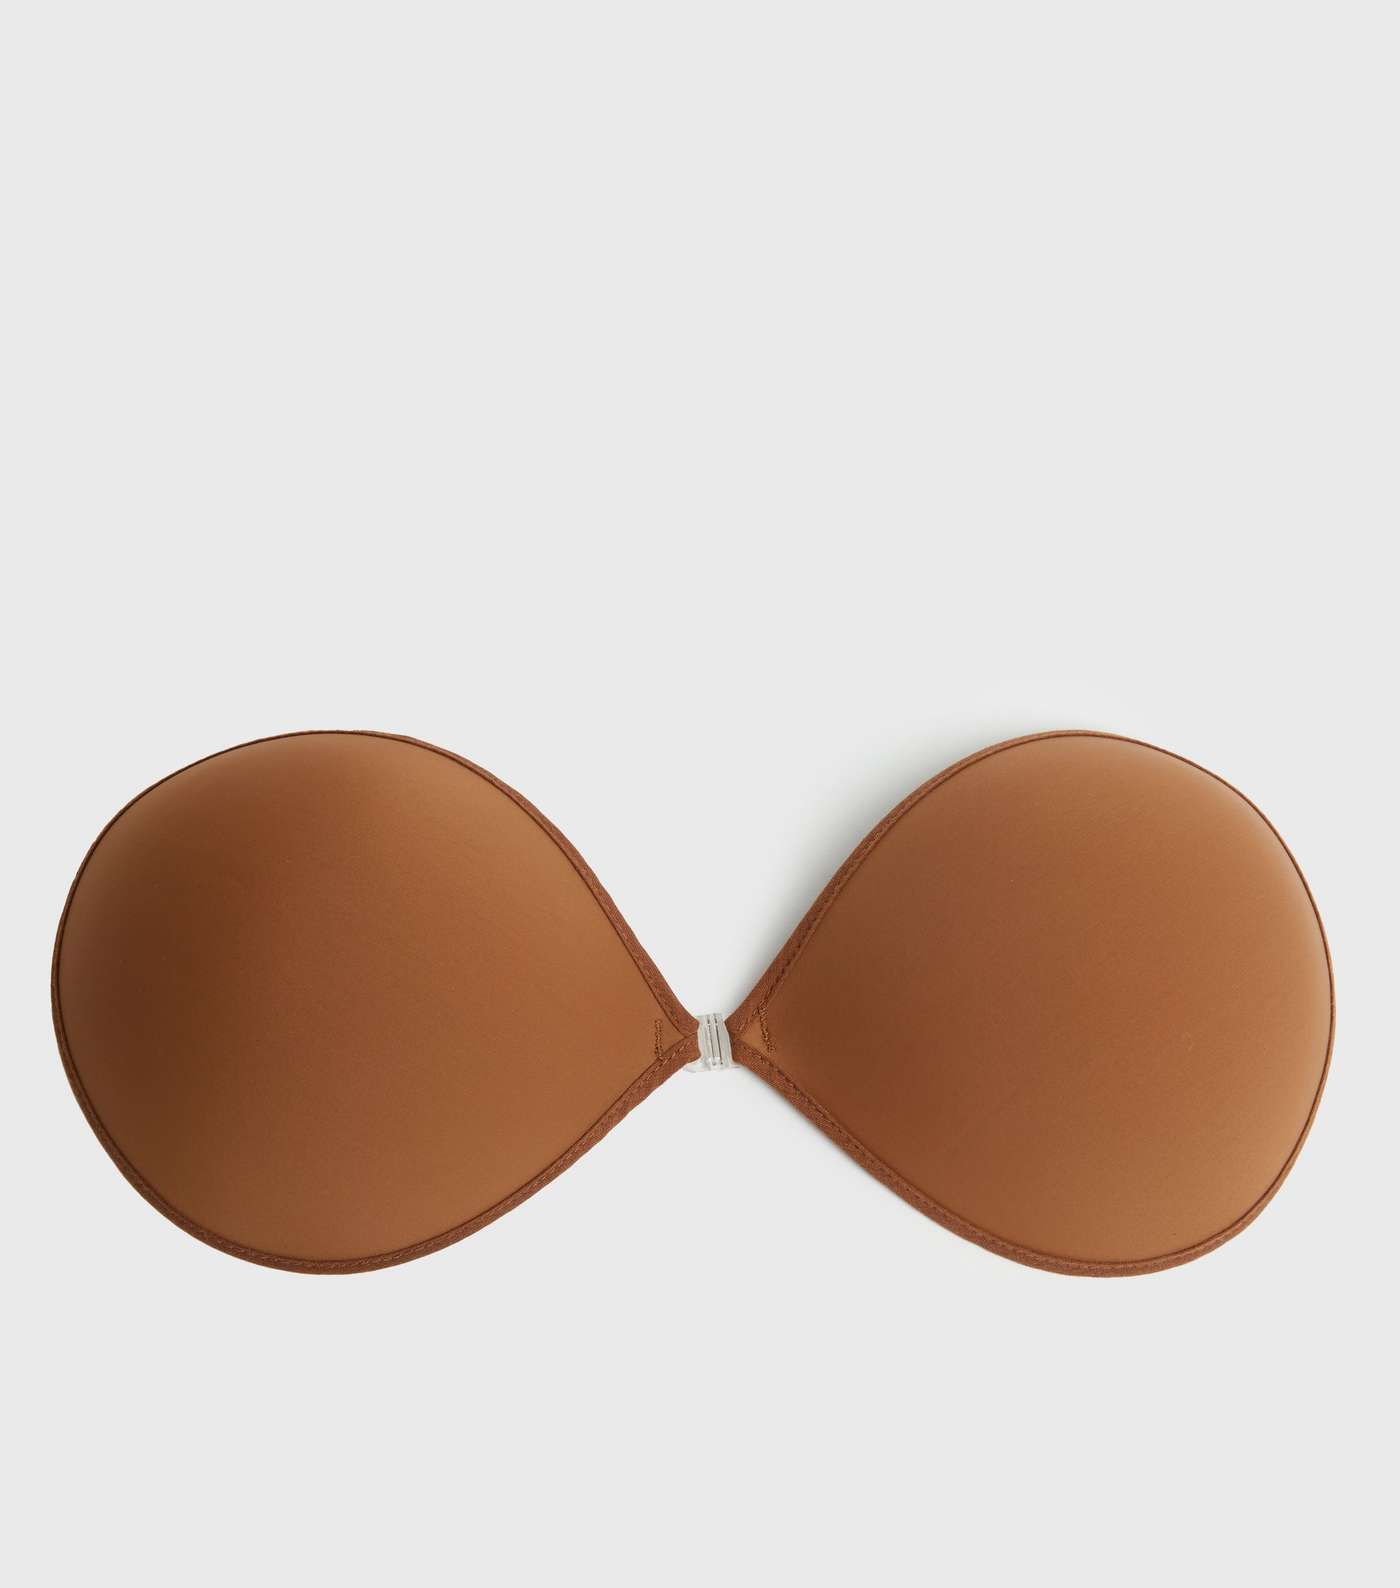 Perfection Beauty Brown D Cup Stick On Bra